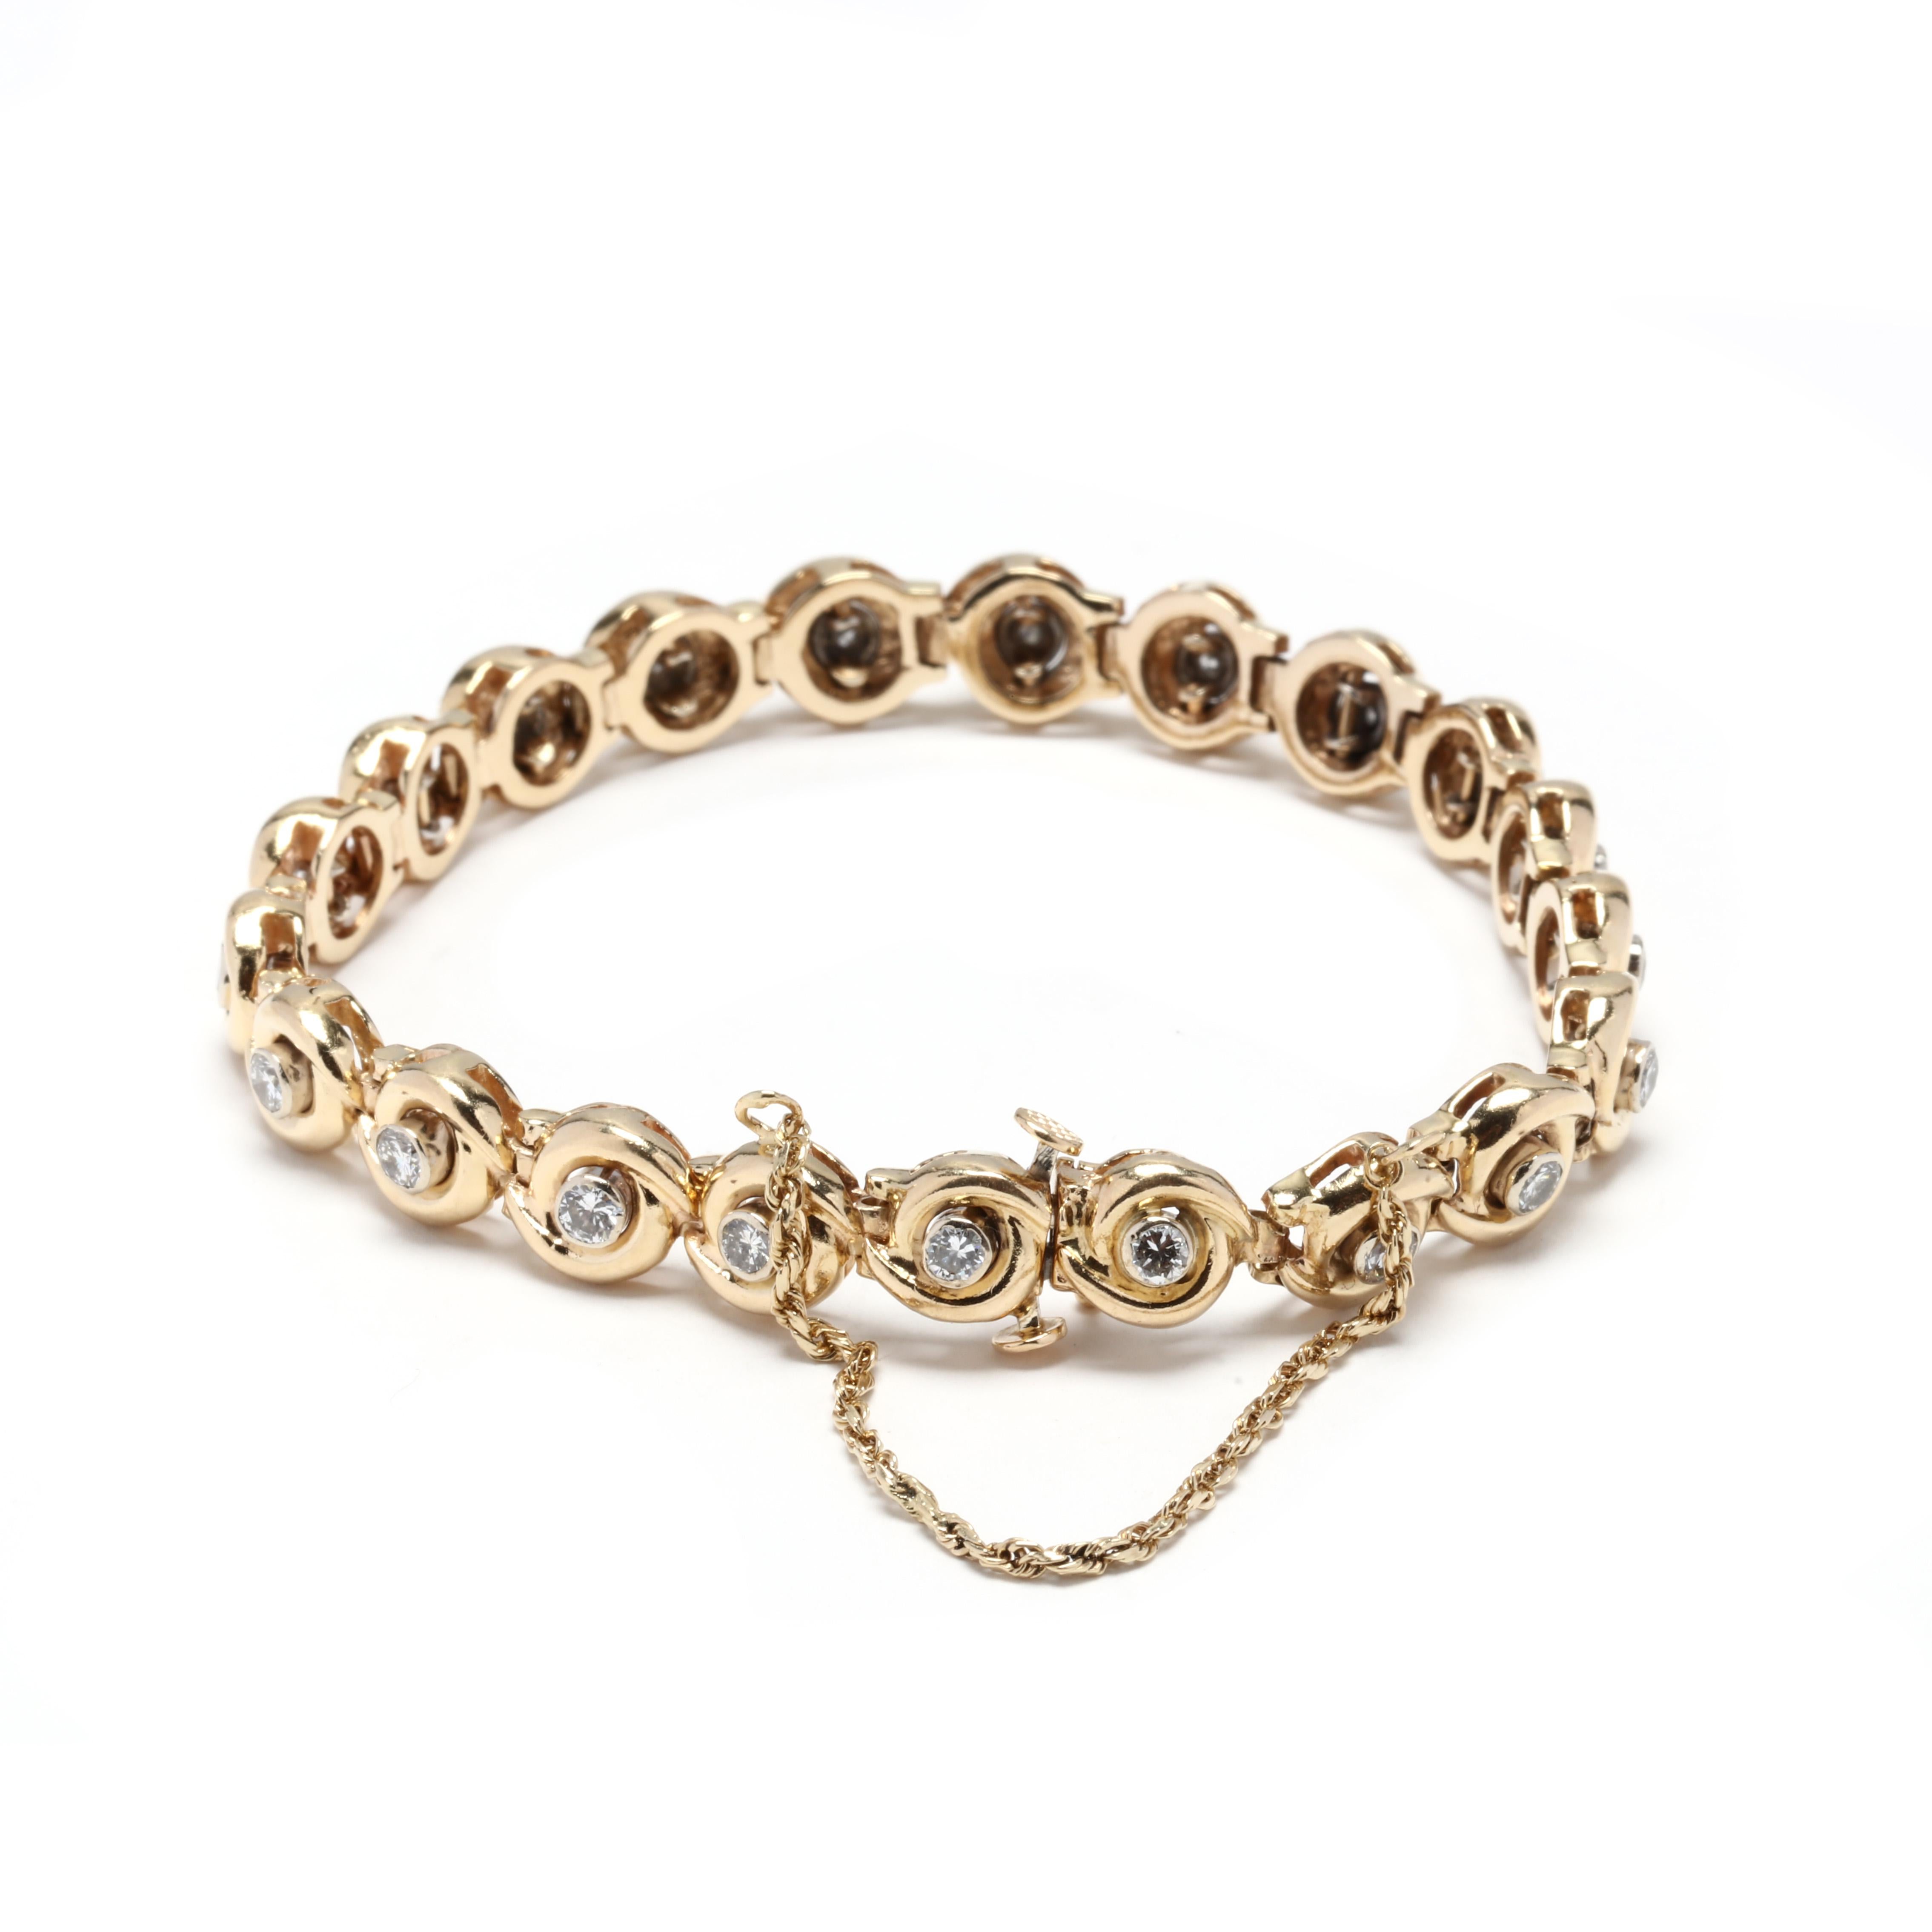 A vintage 14 karat yellow gold diamond bracelet. This bracelet features bezel set, full cut round diamonds weighing approximately 2.30 total carats with a hidden clasp and a safety chain.


Stones:

- diamonds, 21 stones

- full cut round

- 3 mm

-